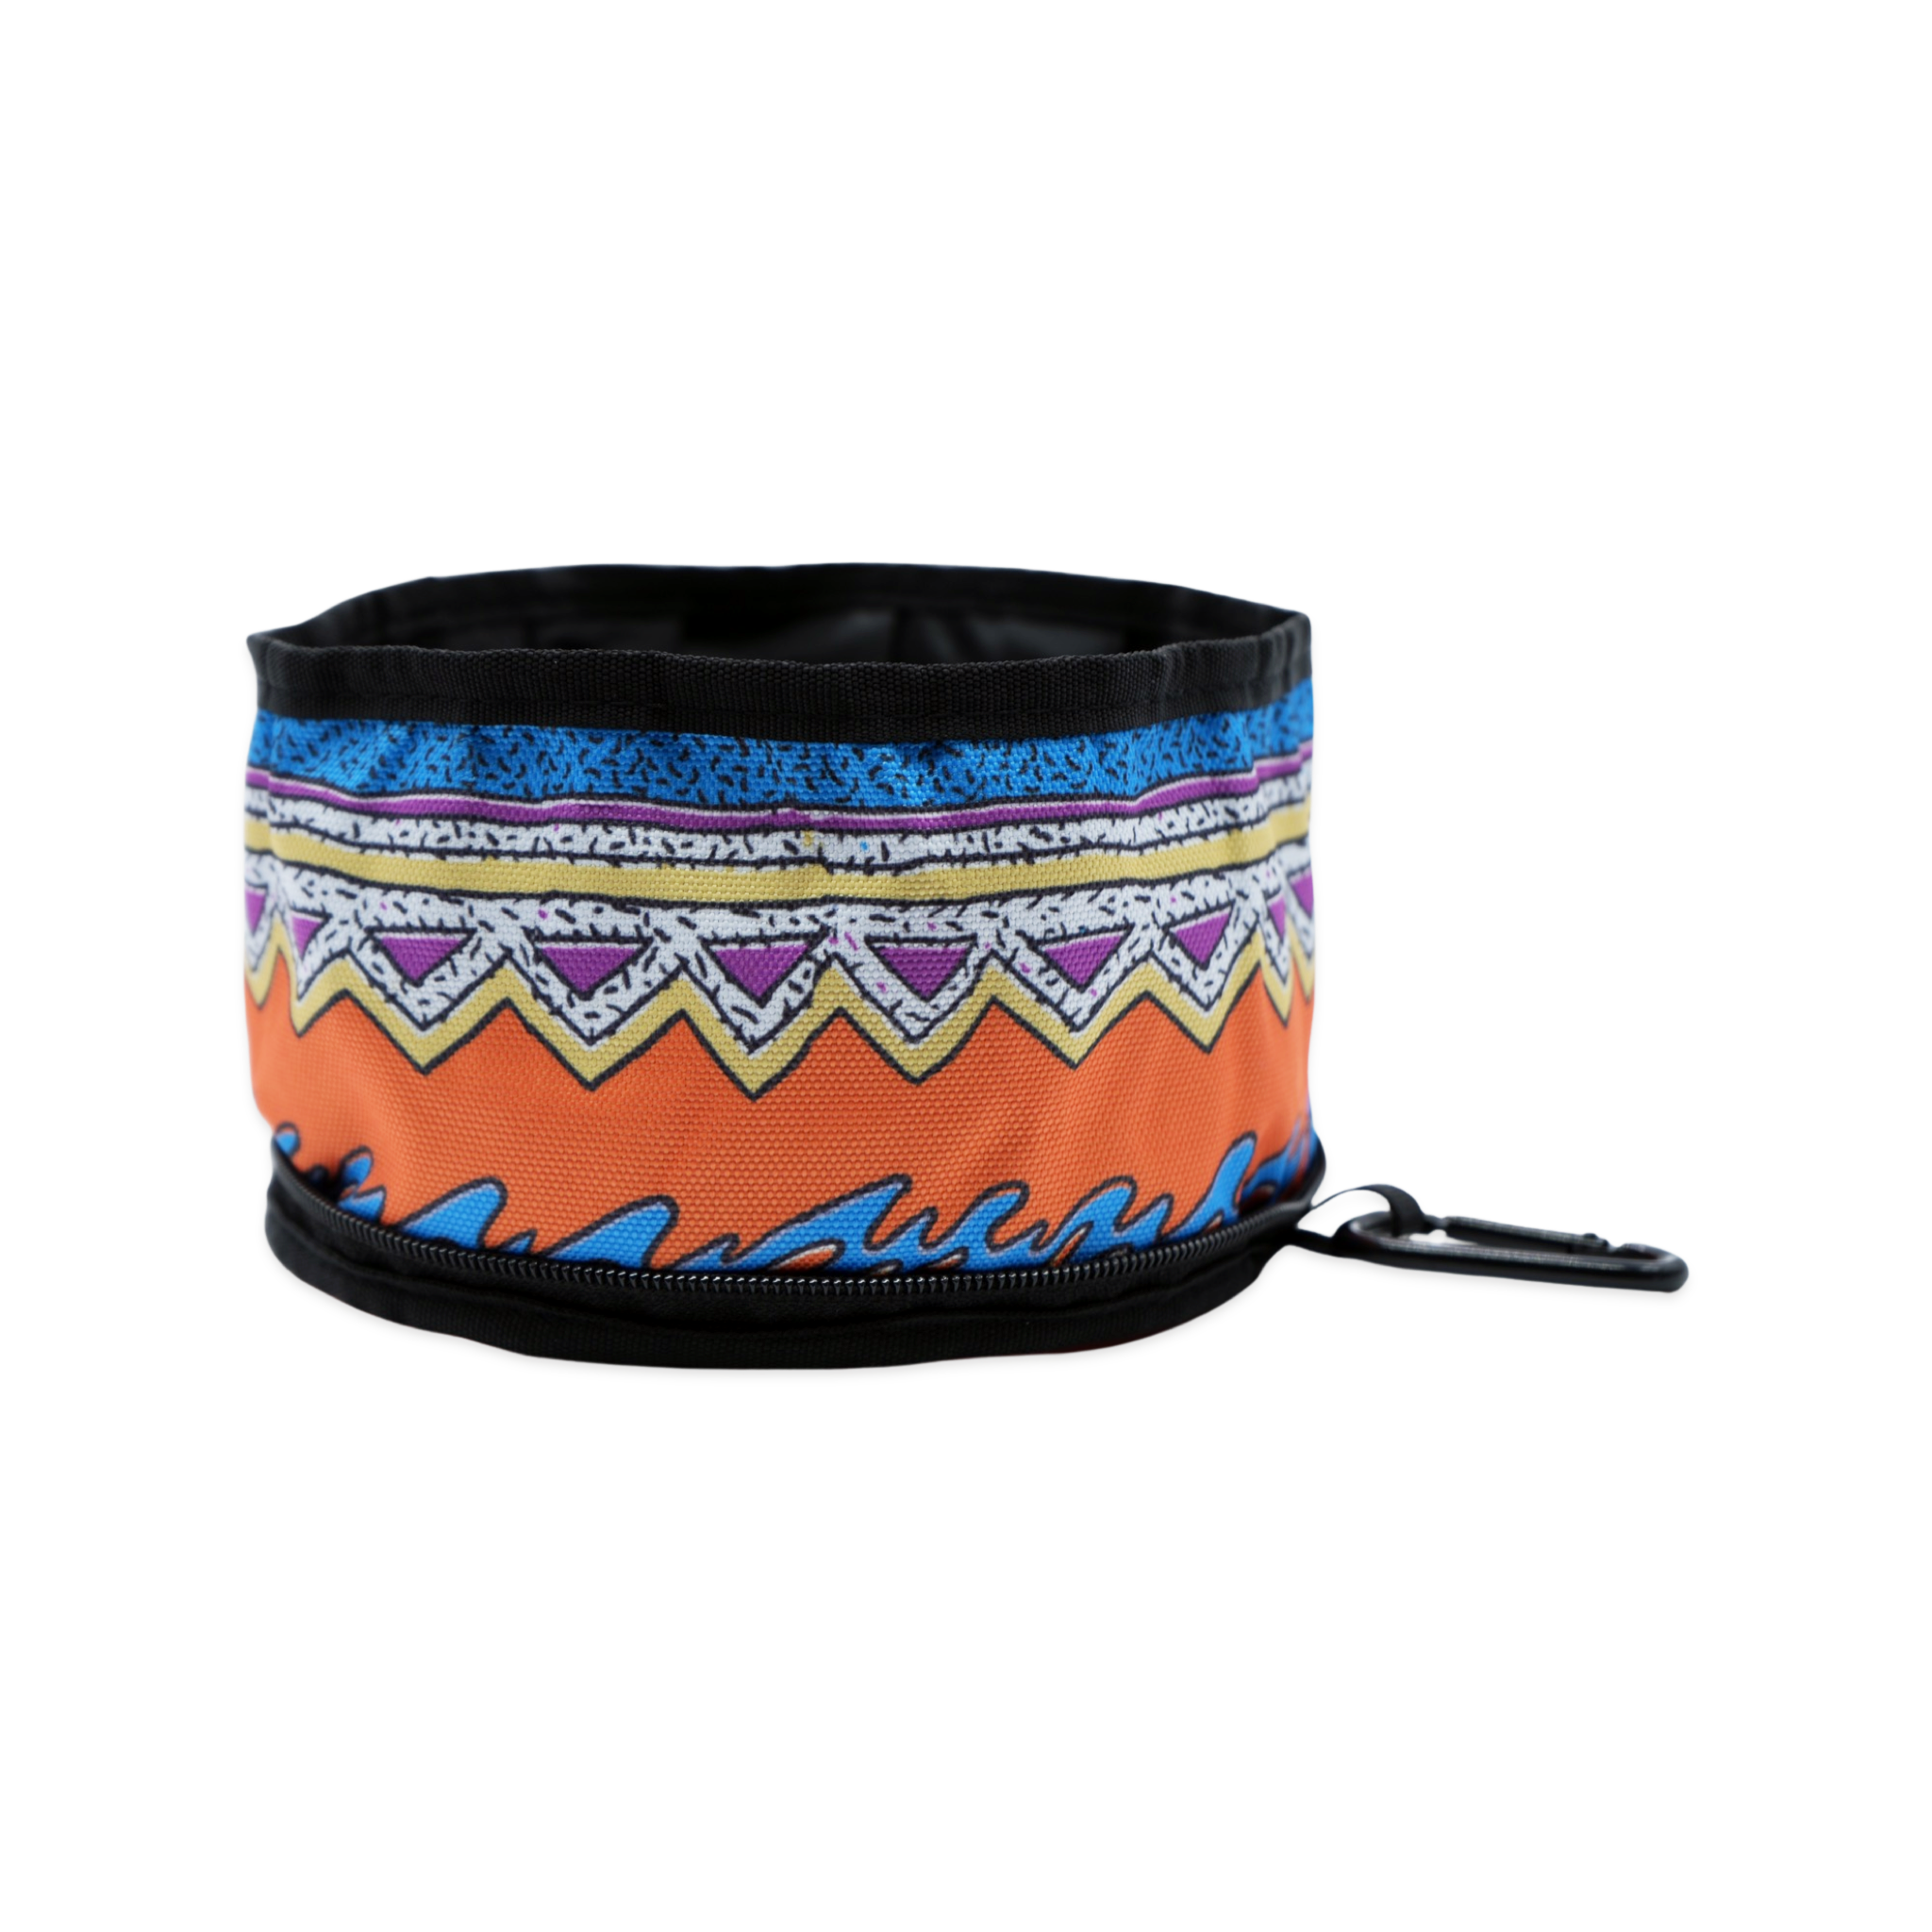 Maui and Sons x Pridebites Collapsable Water Bowl